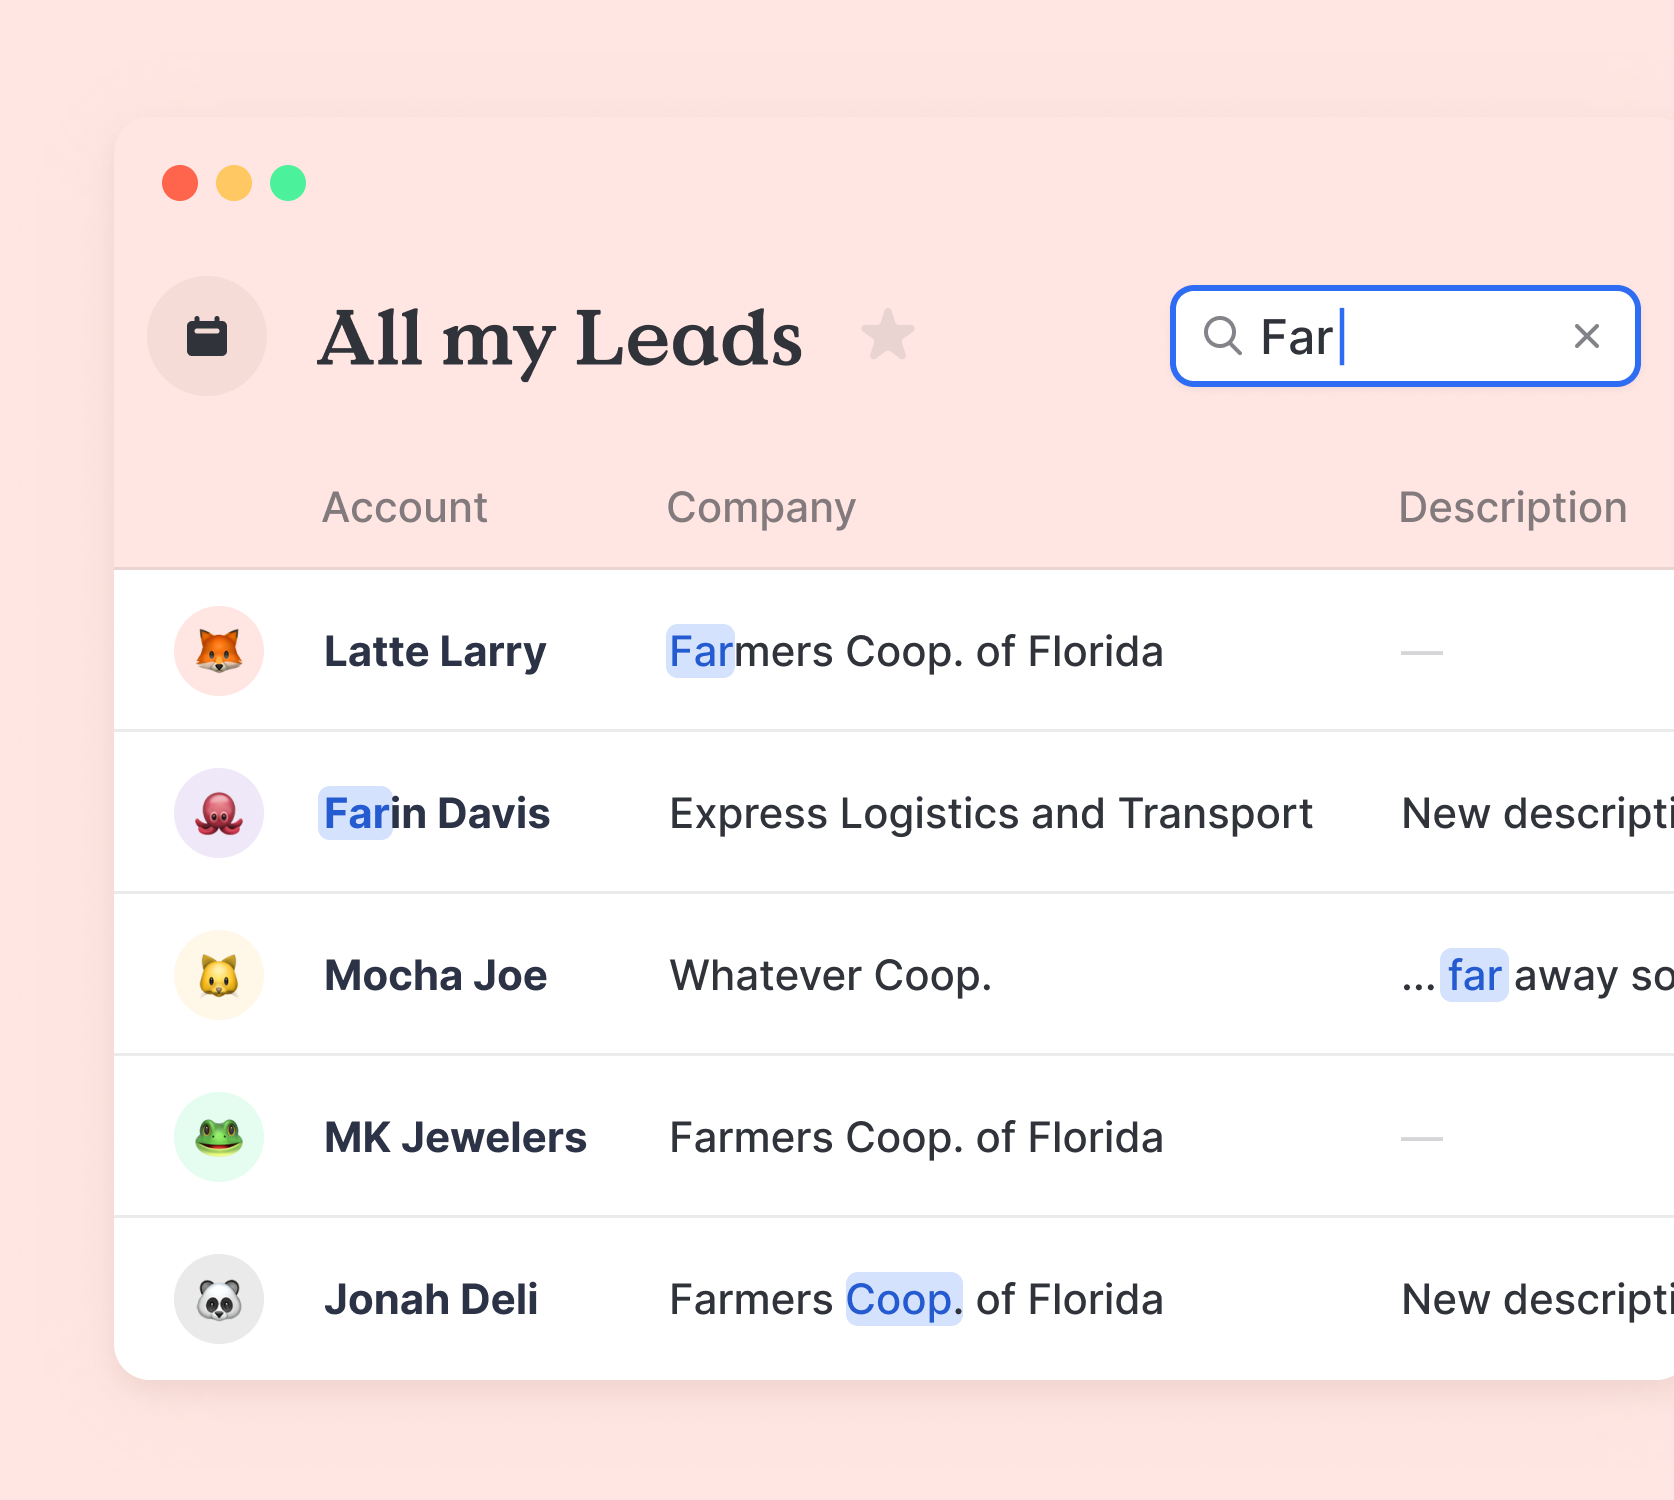 Search leads in table